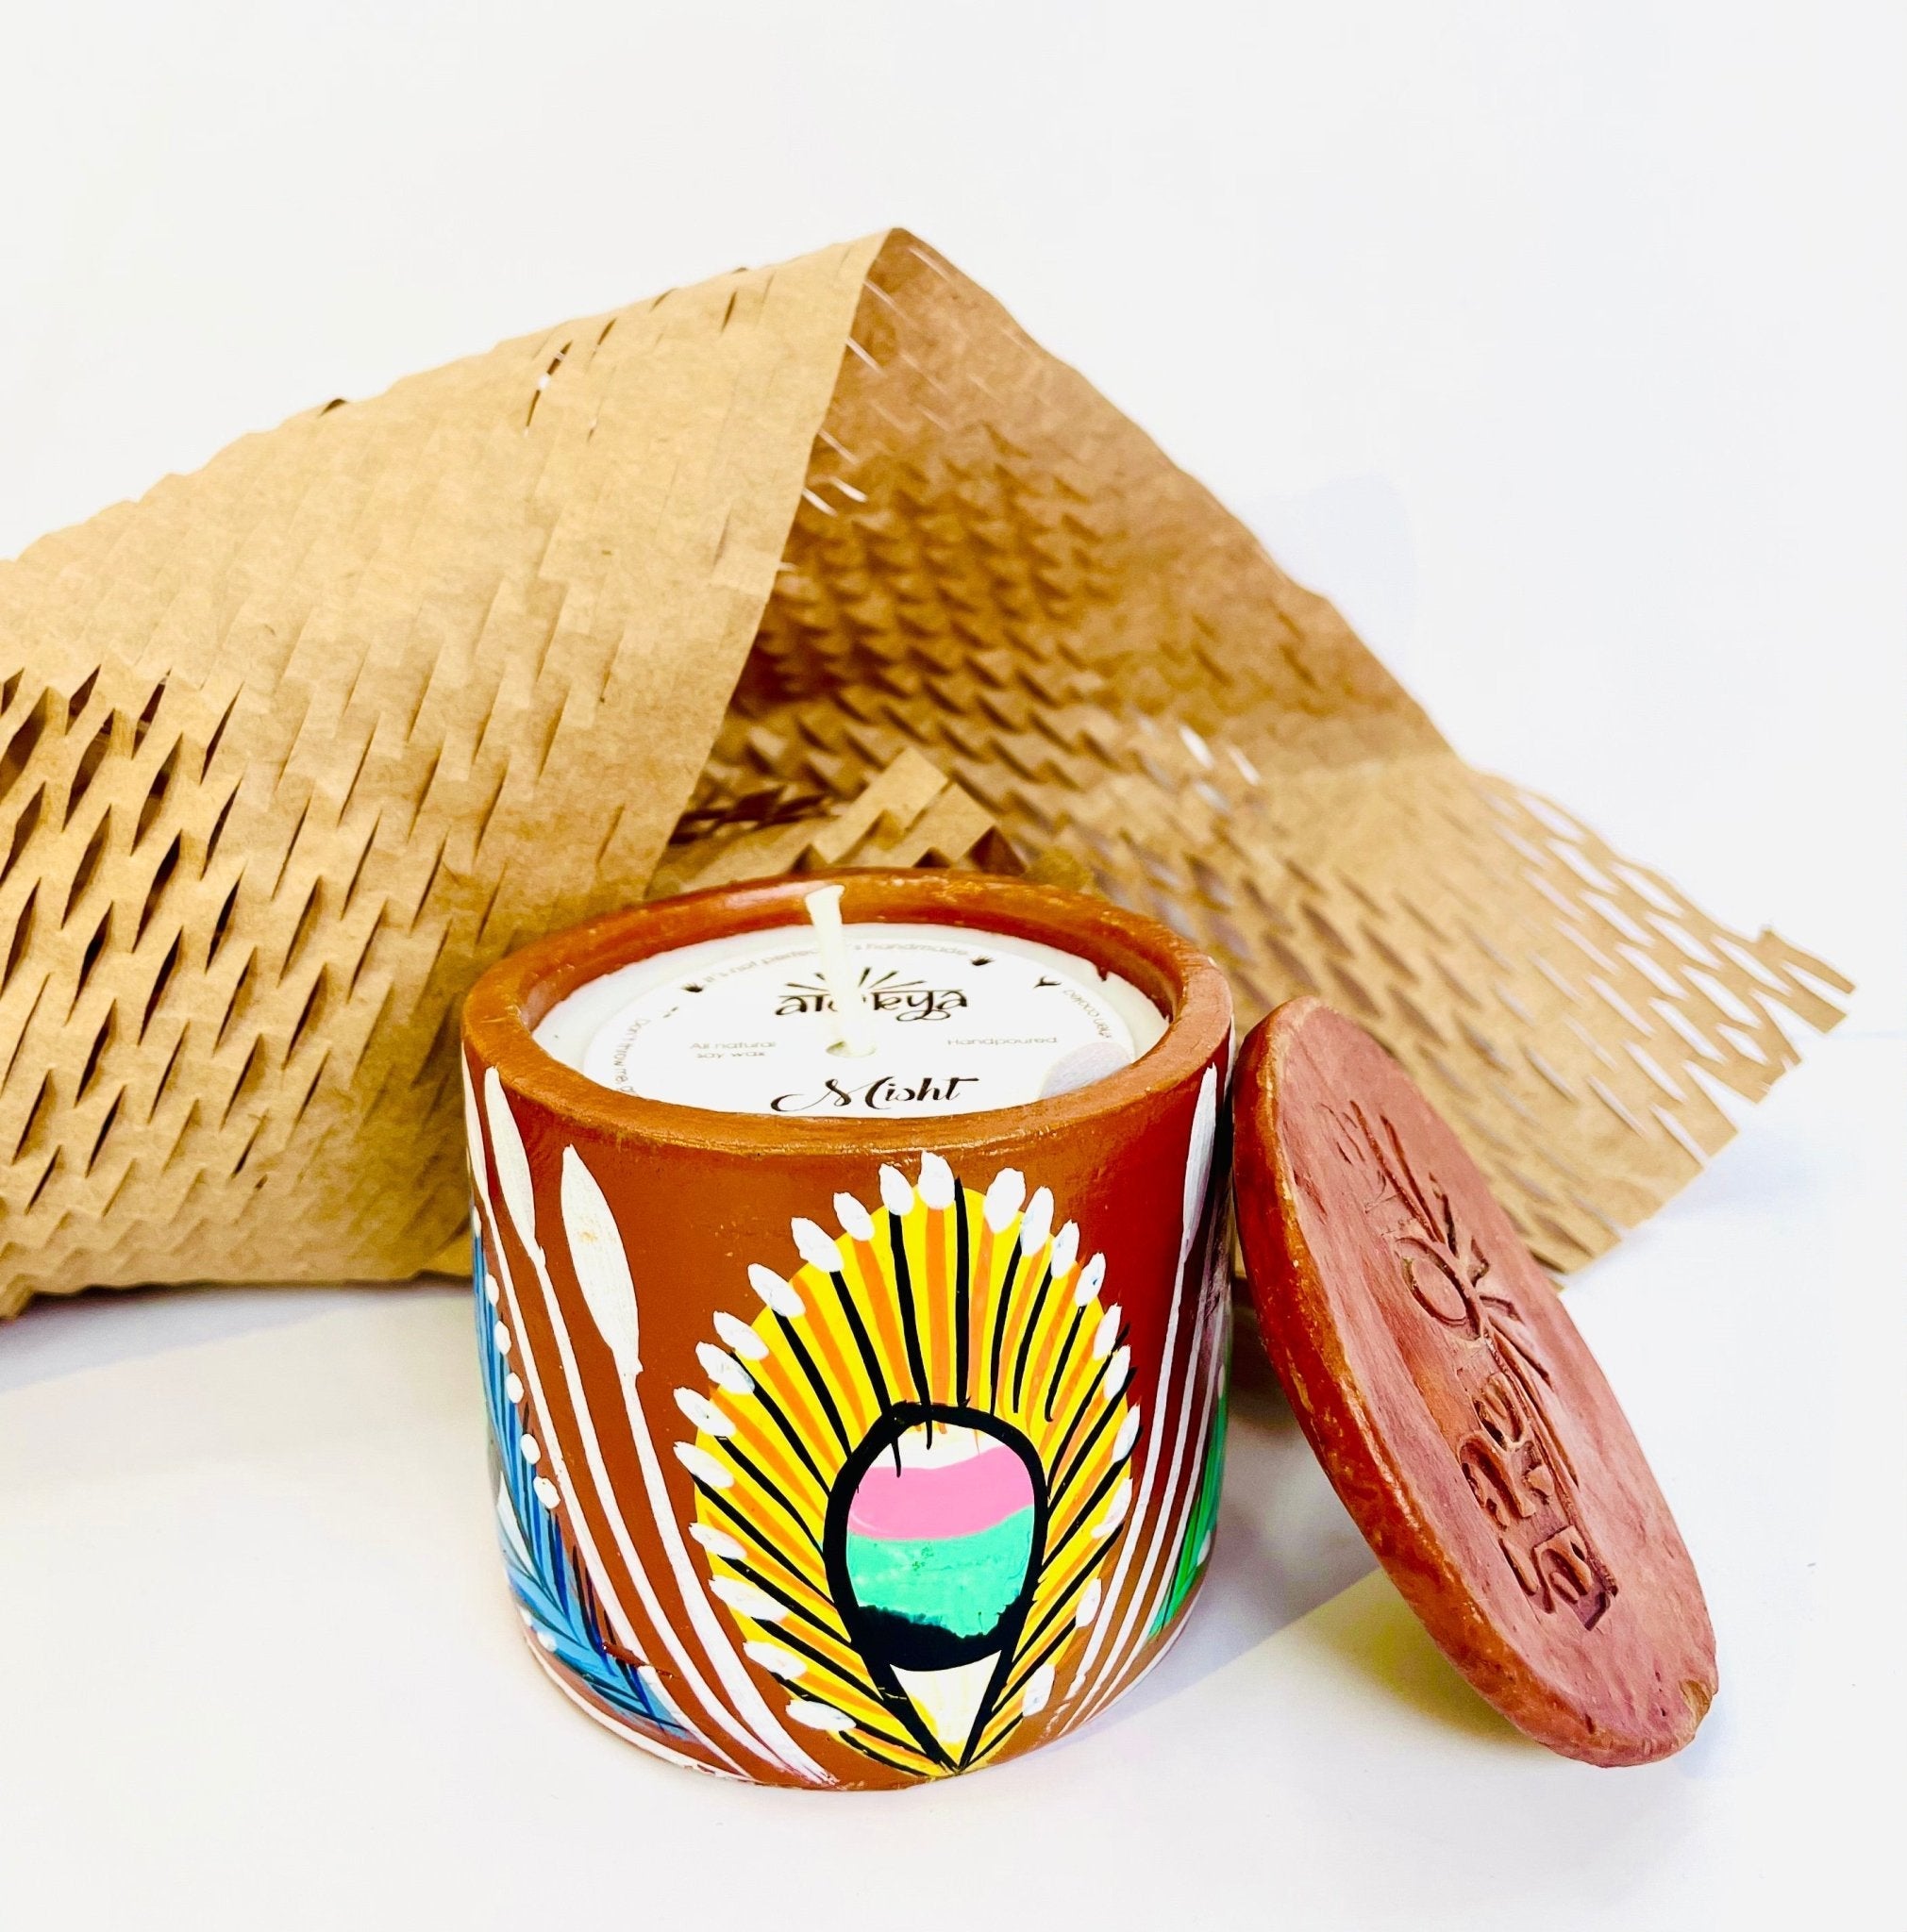 100% natural soy wax scented candle in a terracotta jar hand painted with yellow feathers is covered with a seed paper candle dust cover and honeycomb paper and candle snuffer is placed around the candle